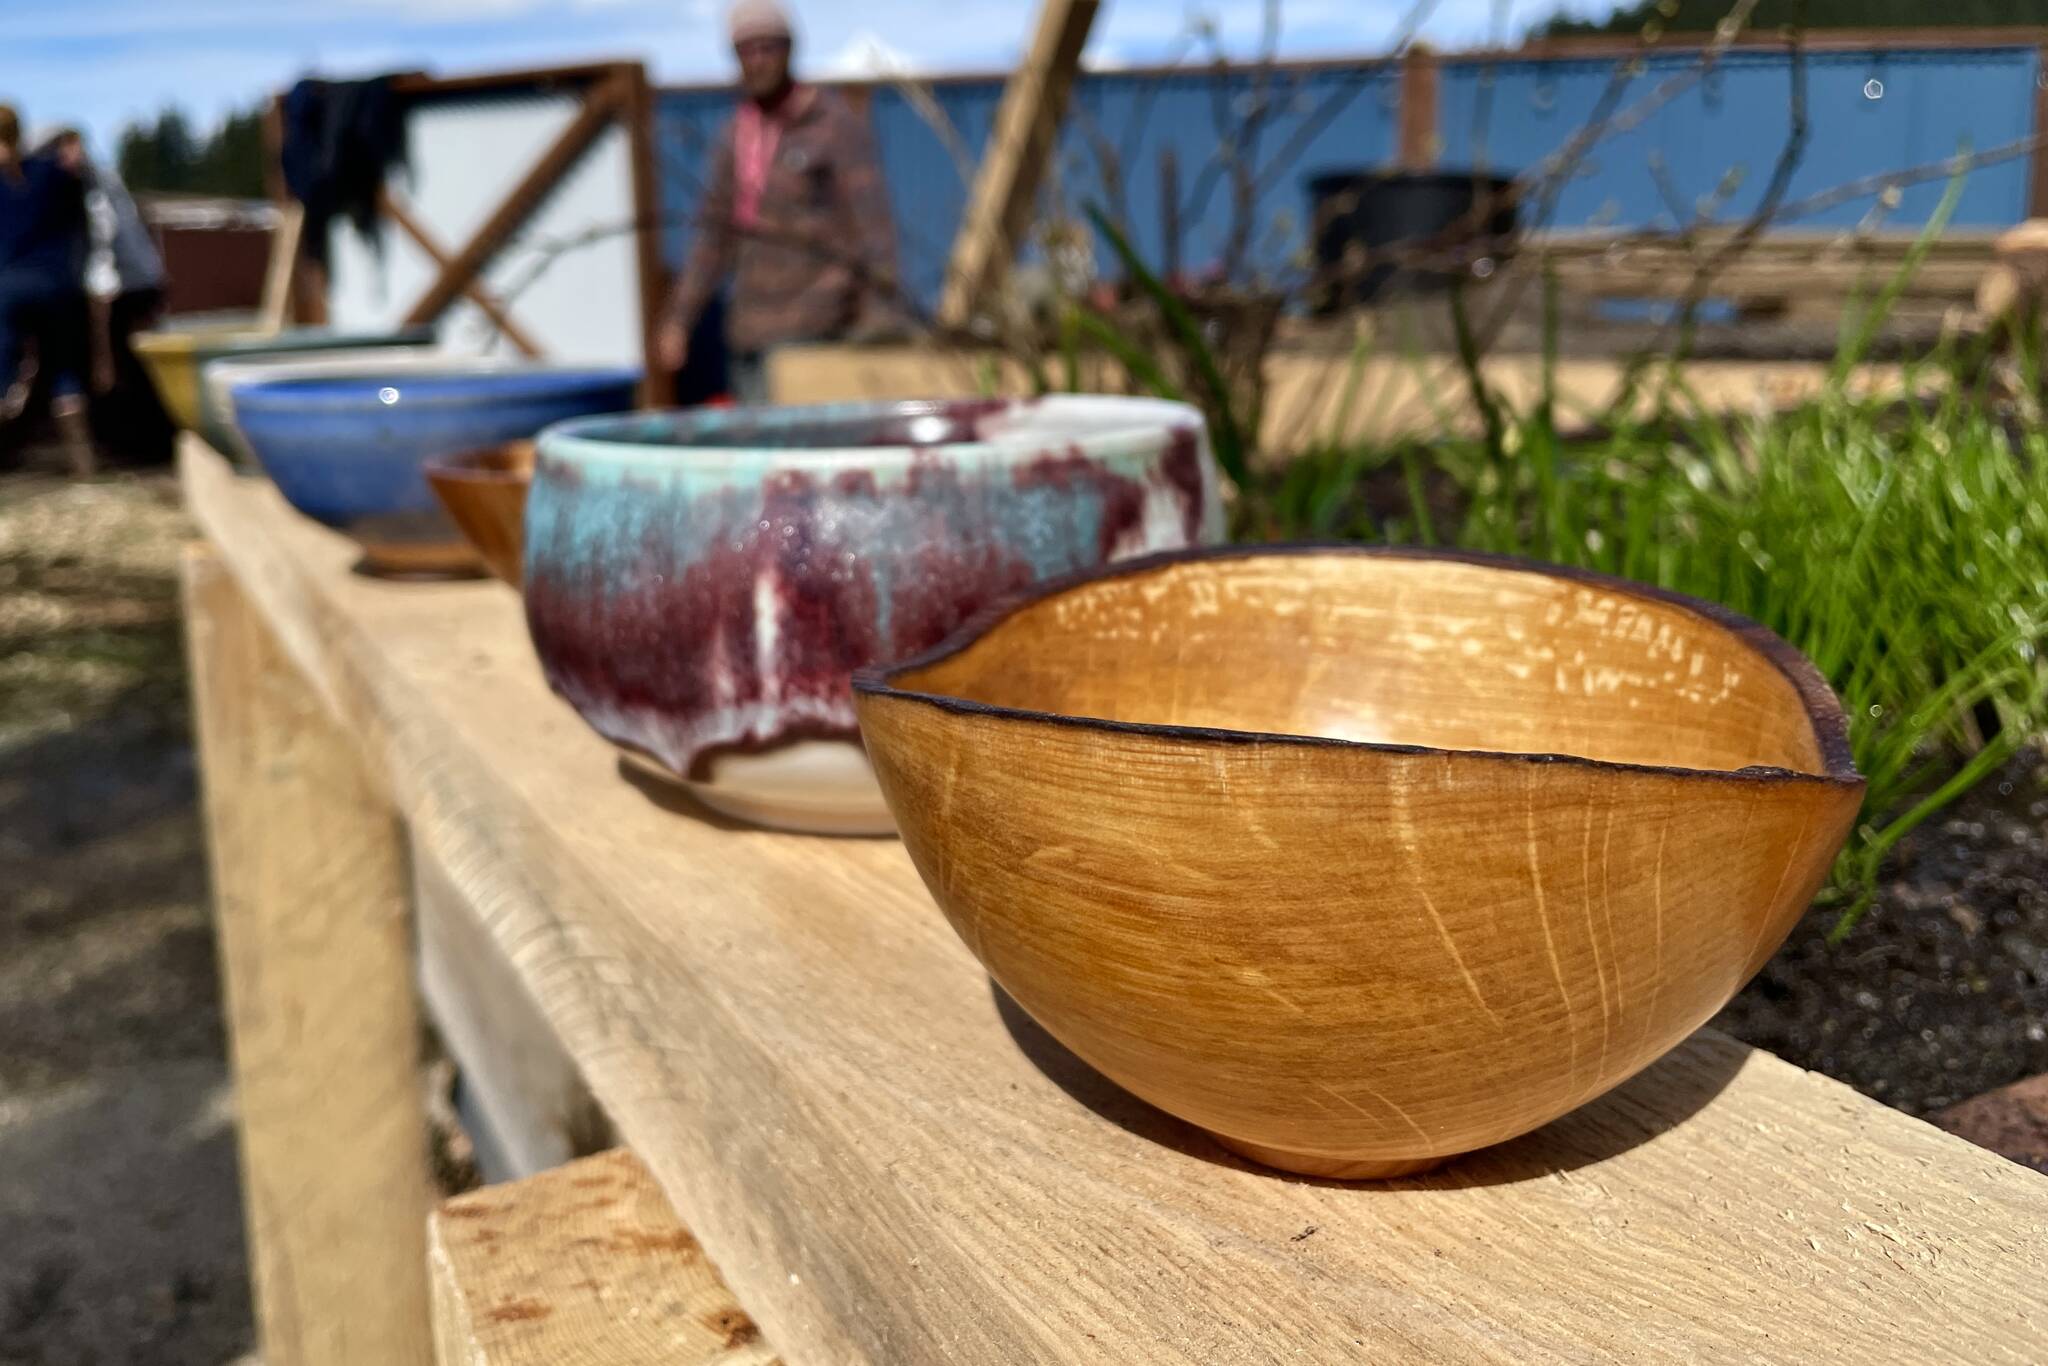 Some of the bowls available for selection by attendees of the Empty Bowls event, the Glory Hall’s annual fundraiser, sit on display at the shelter’s new garden. (Michael S. Lockett / Juneau Empire)